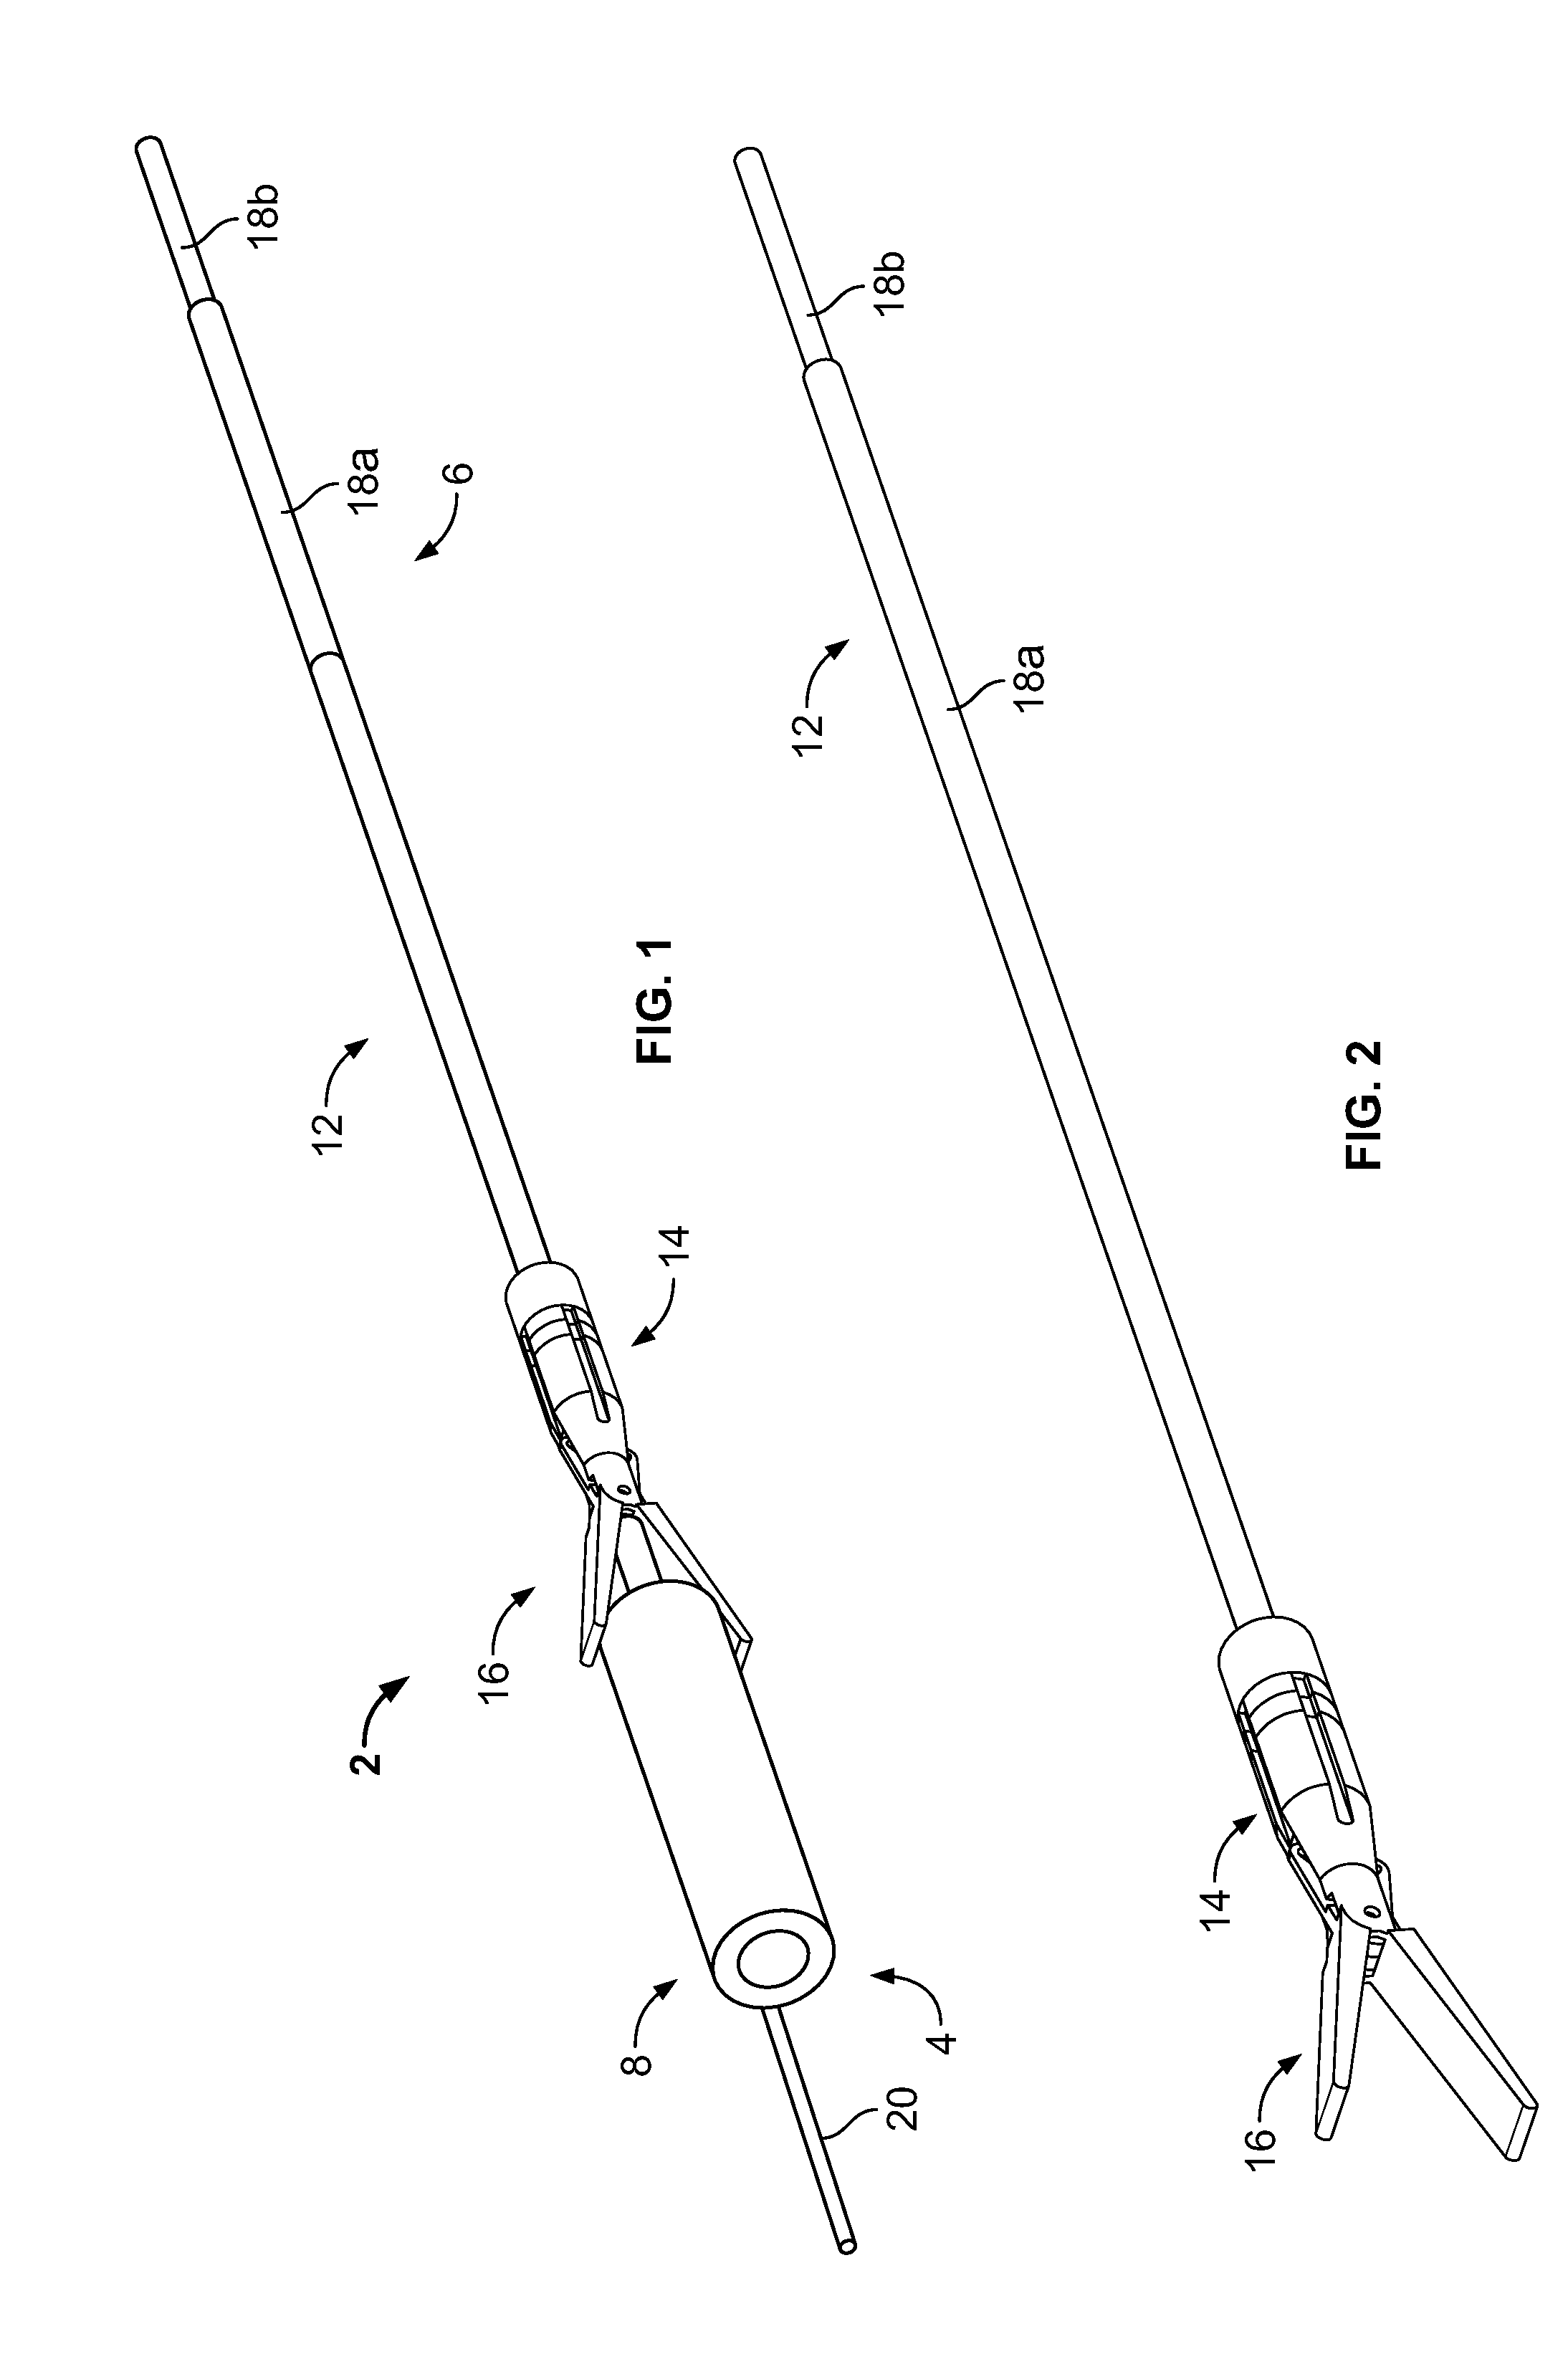 Surgical device and methods